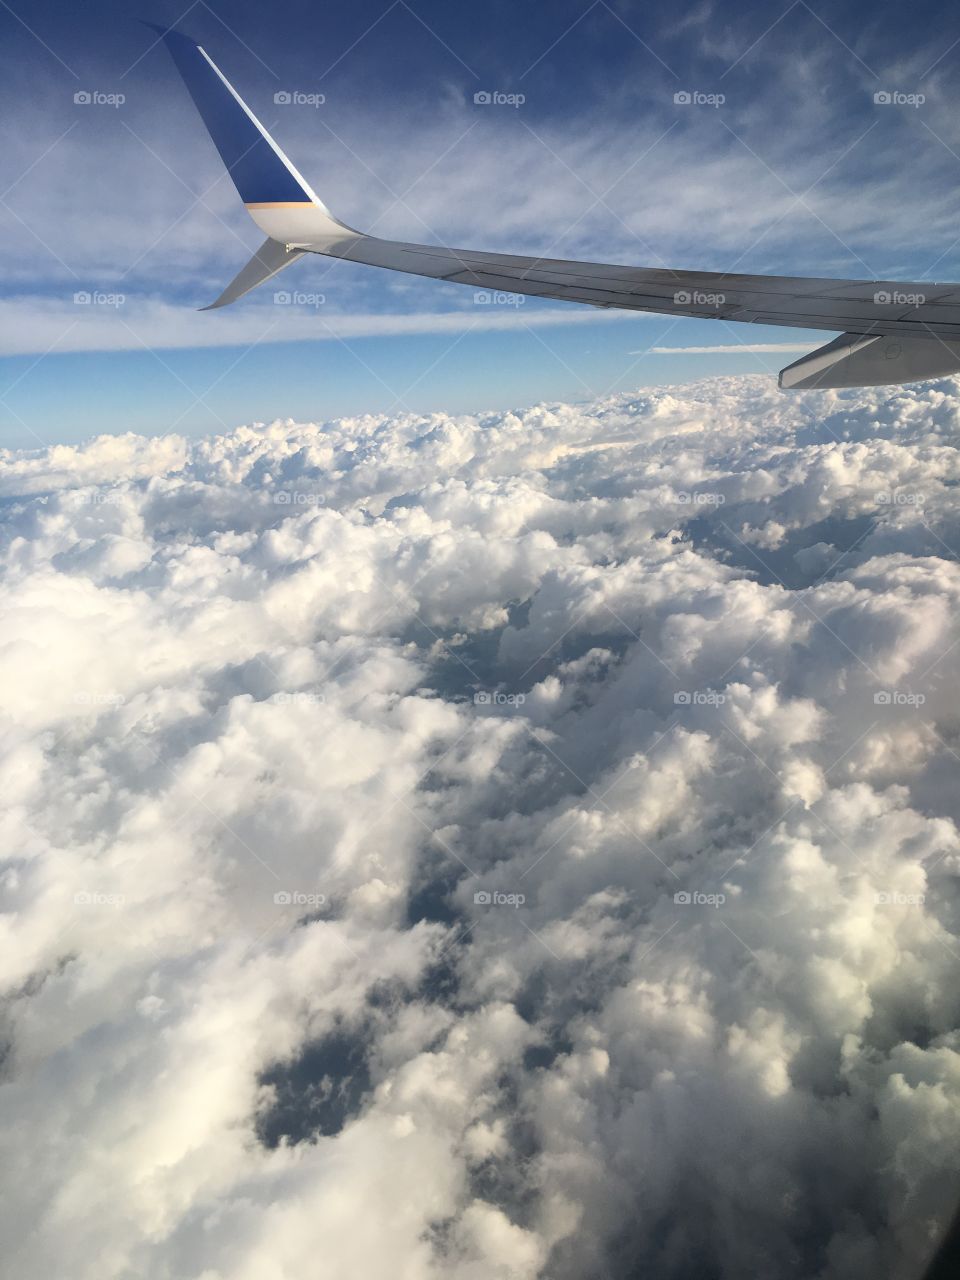 A view from above the clouds while traveling from Albany, NY to Phoenix, AZ